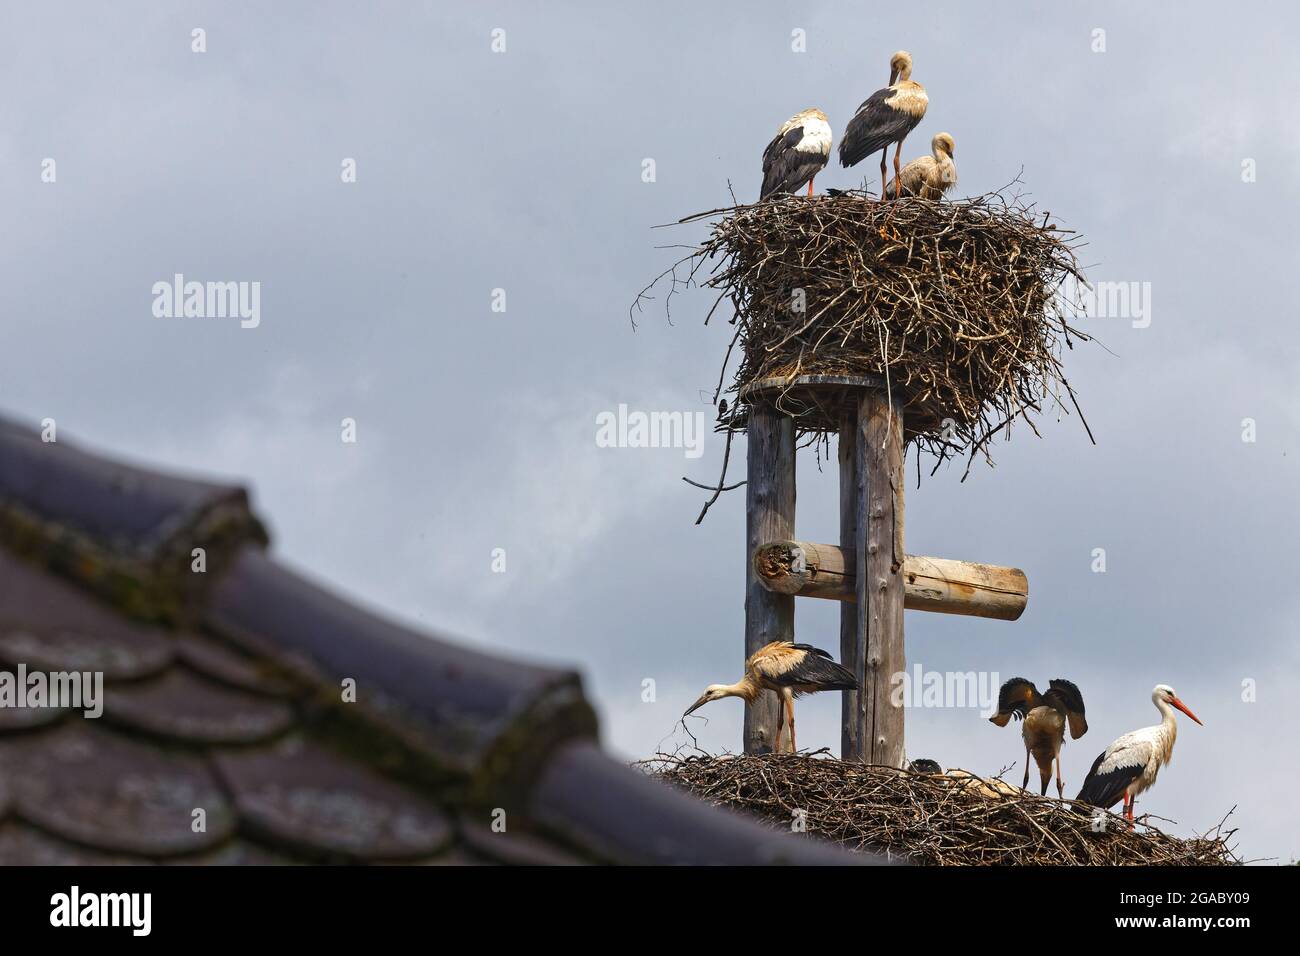 Storks and their nest in Strasbourg. Storks are symbol of Alsace region. Stock Photo